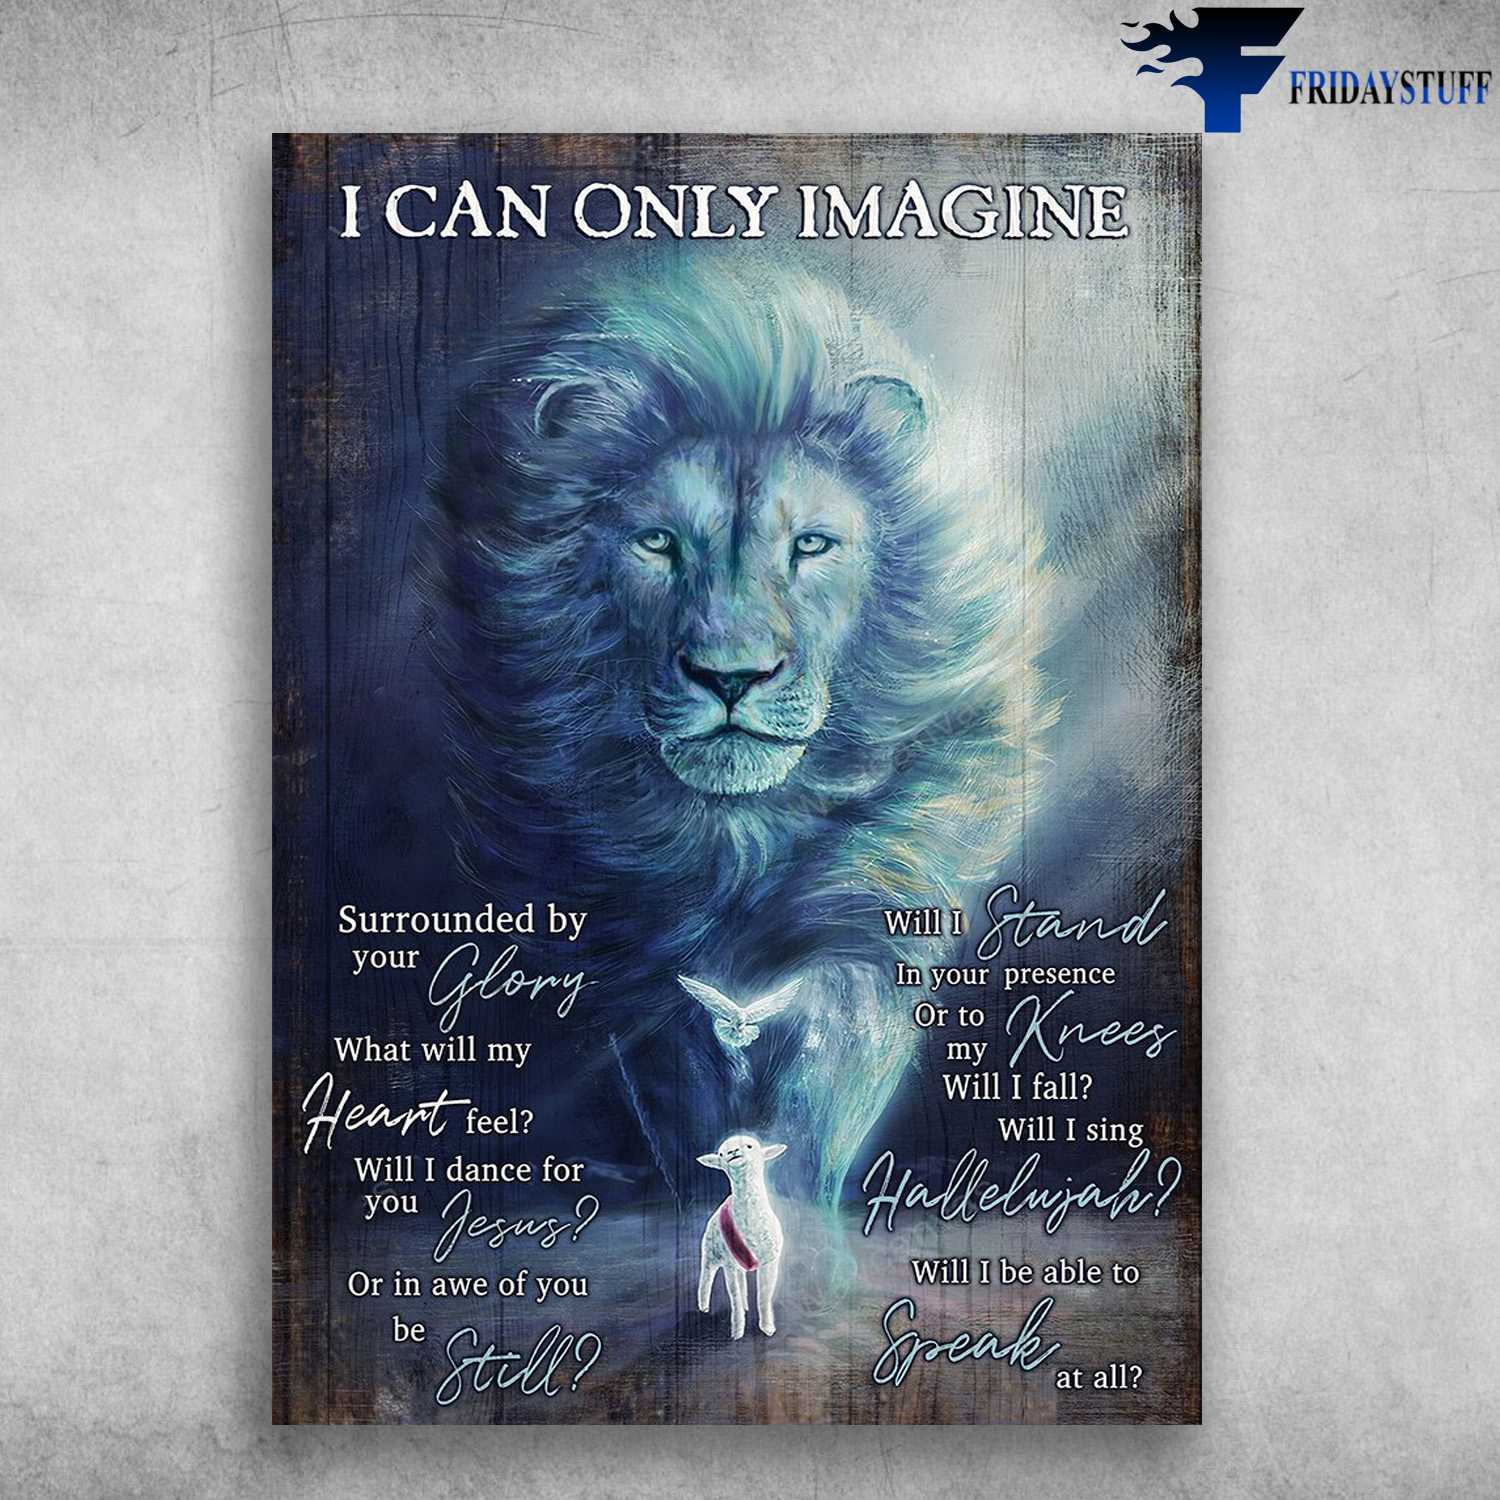 Lion Lamb Dove - I Can Only Imagine, Surrounded By Your Glory, What Will My Heart Feel, Will I Dance For You Jesus, Or In Awe Of You Be Still, Will I Stand In Your Presence